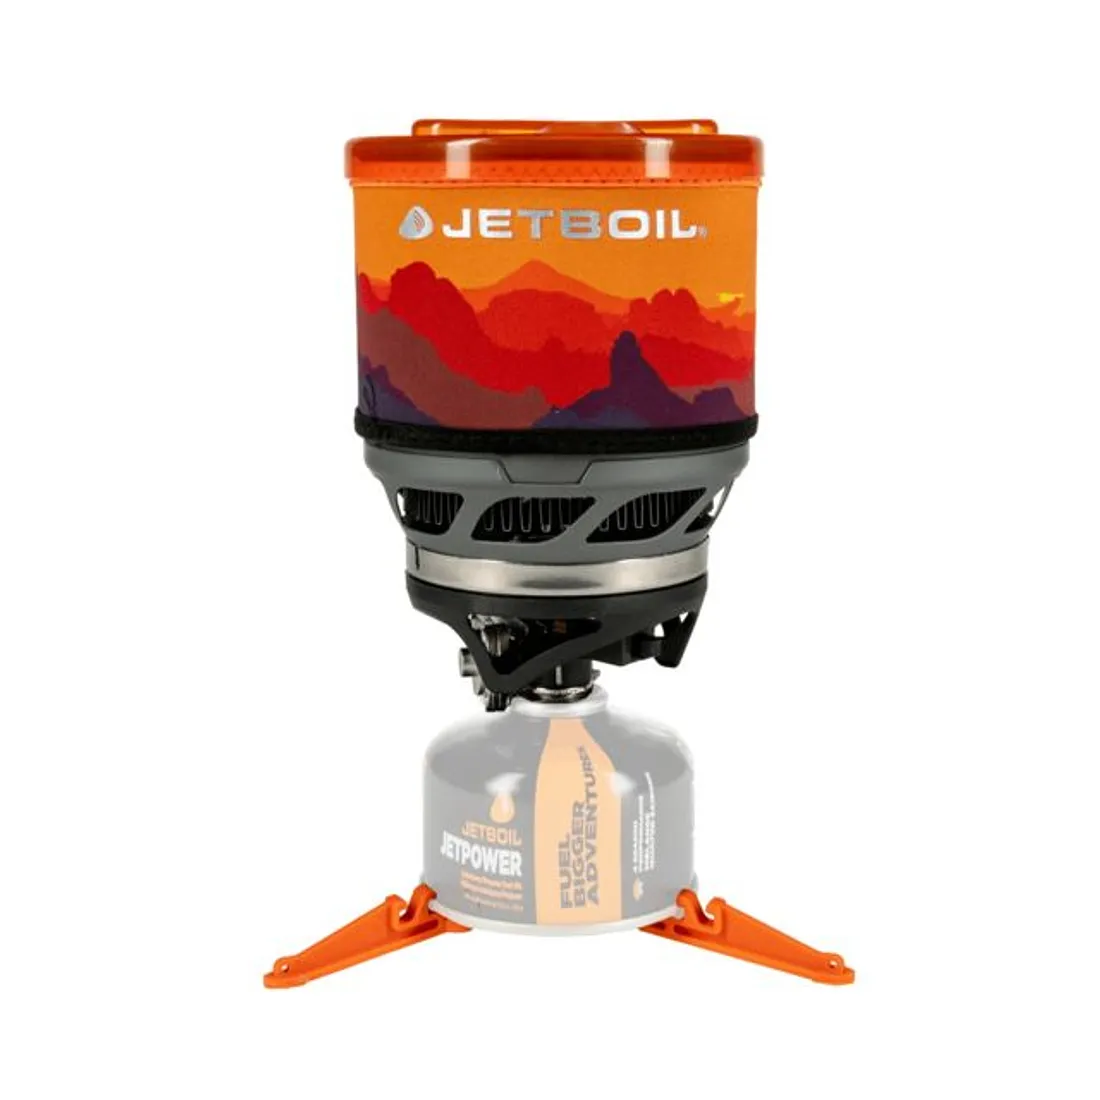 Jetboil MiniMo Cooking System Backpacking Stove